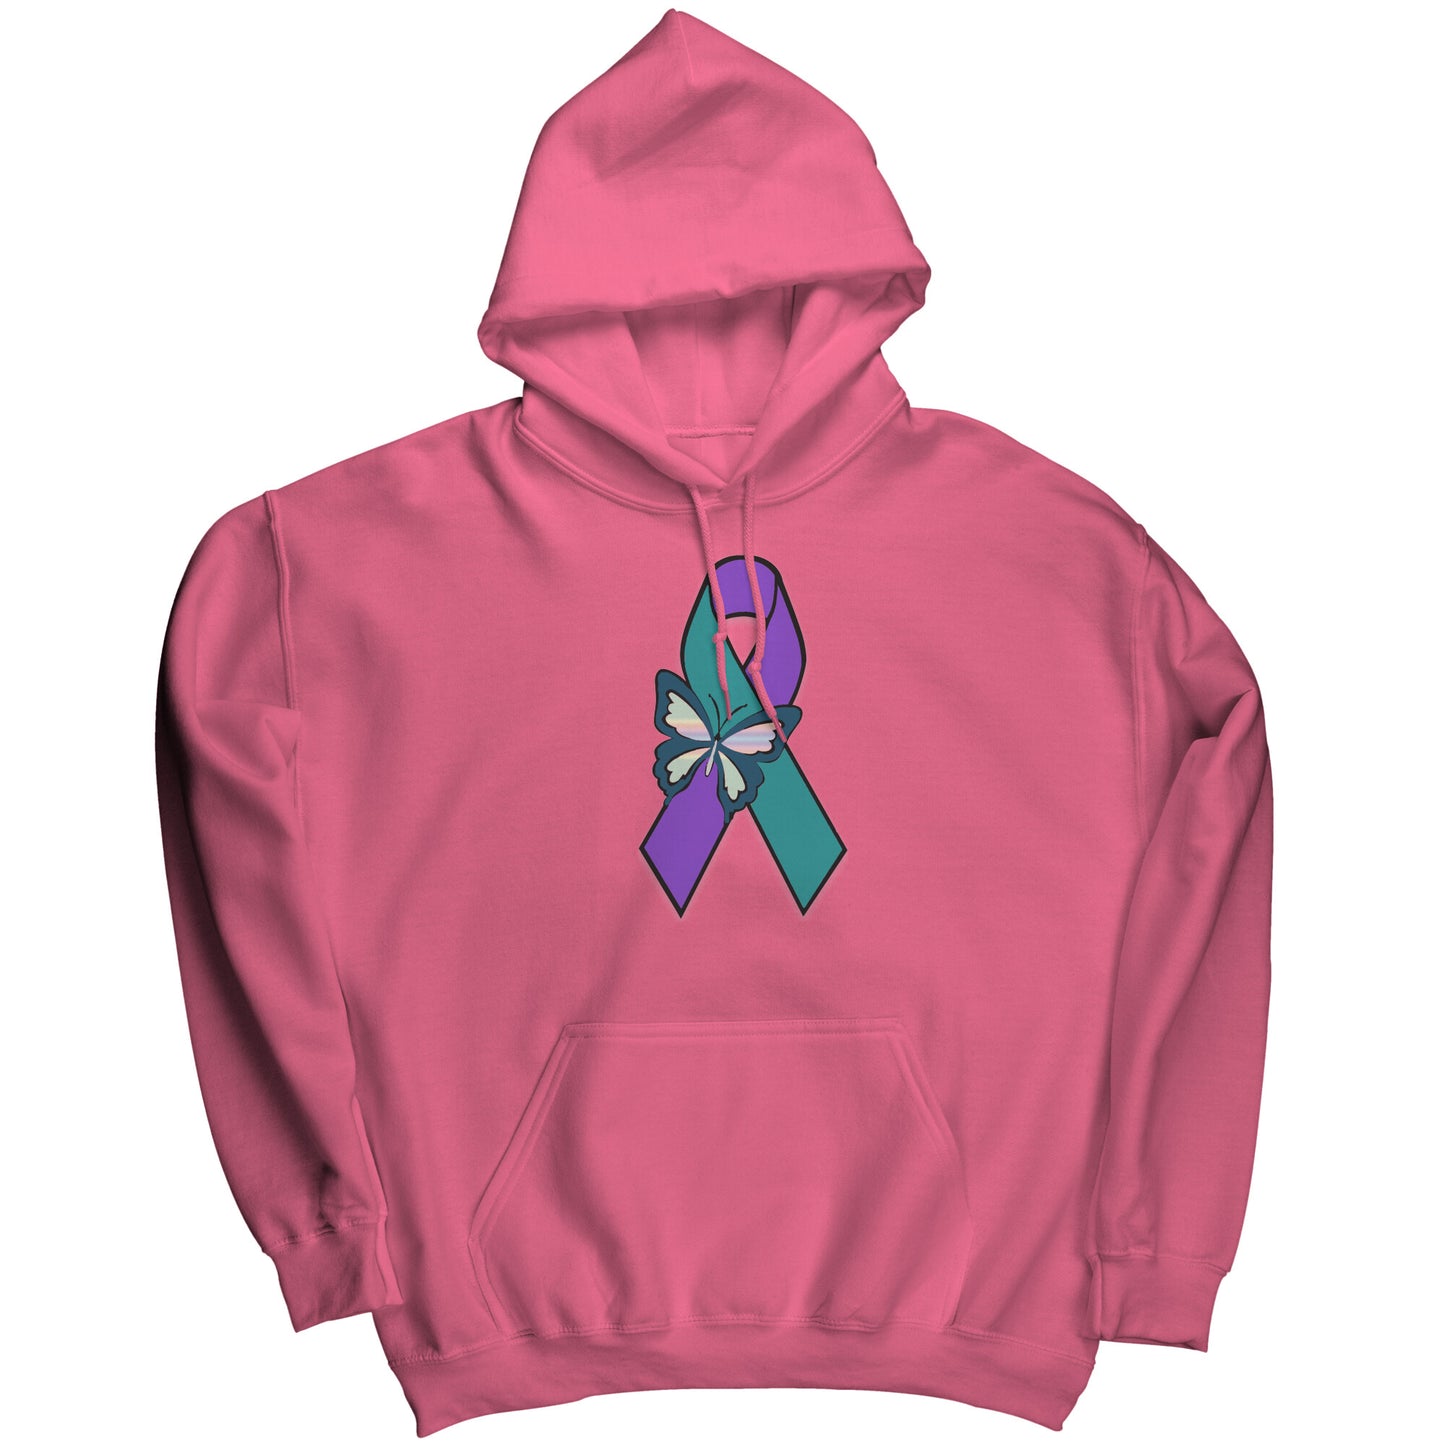 Suicide Awareness Butterfly Ribbon Hoodie